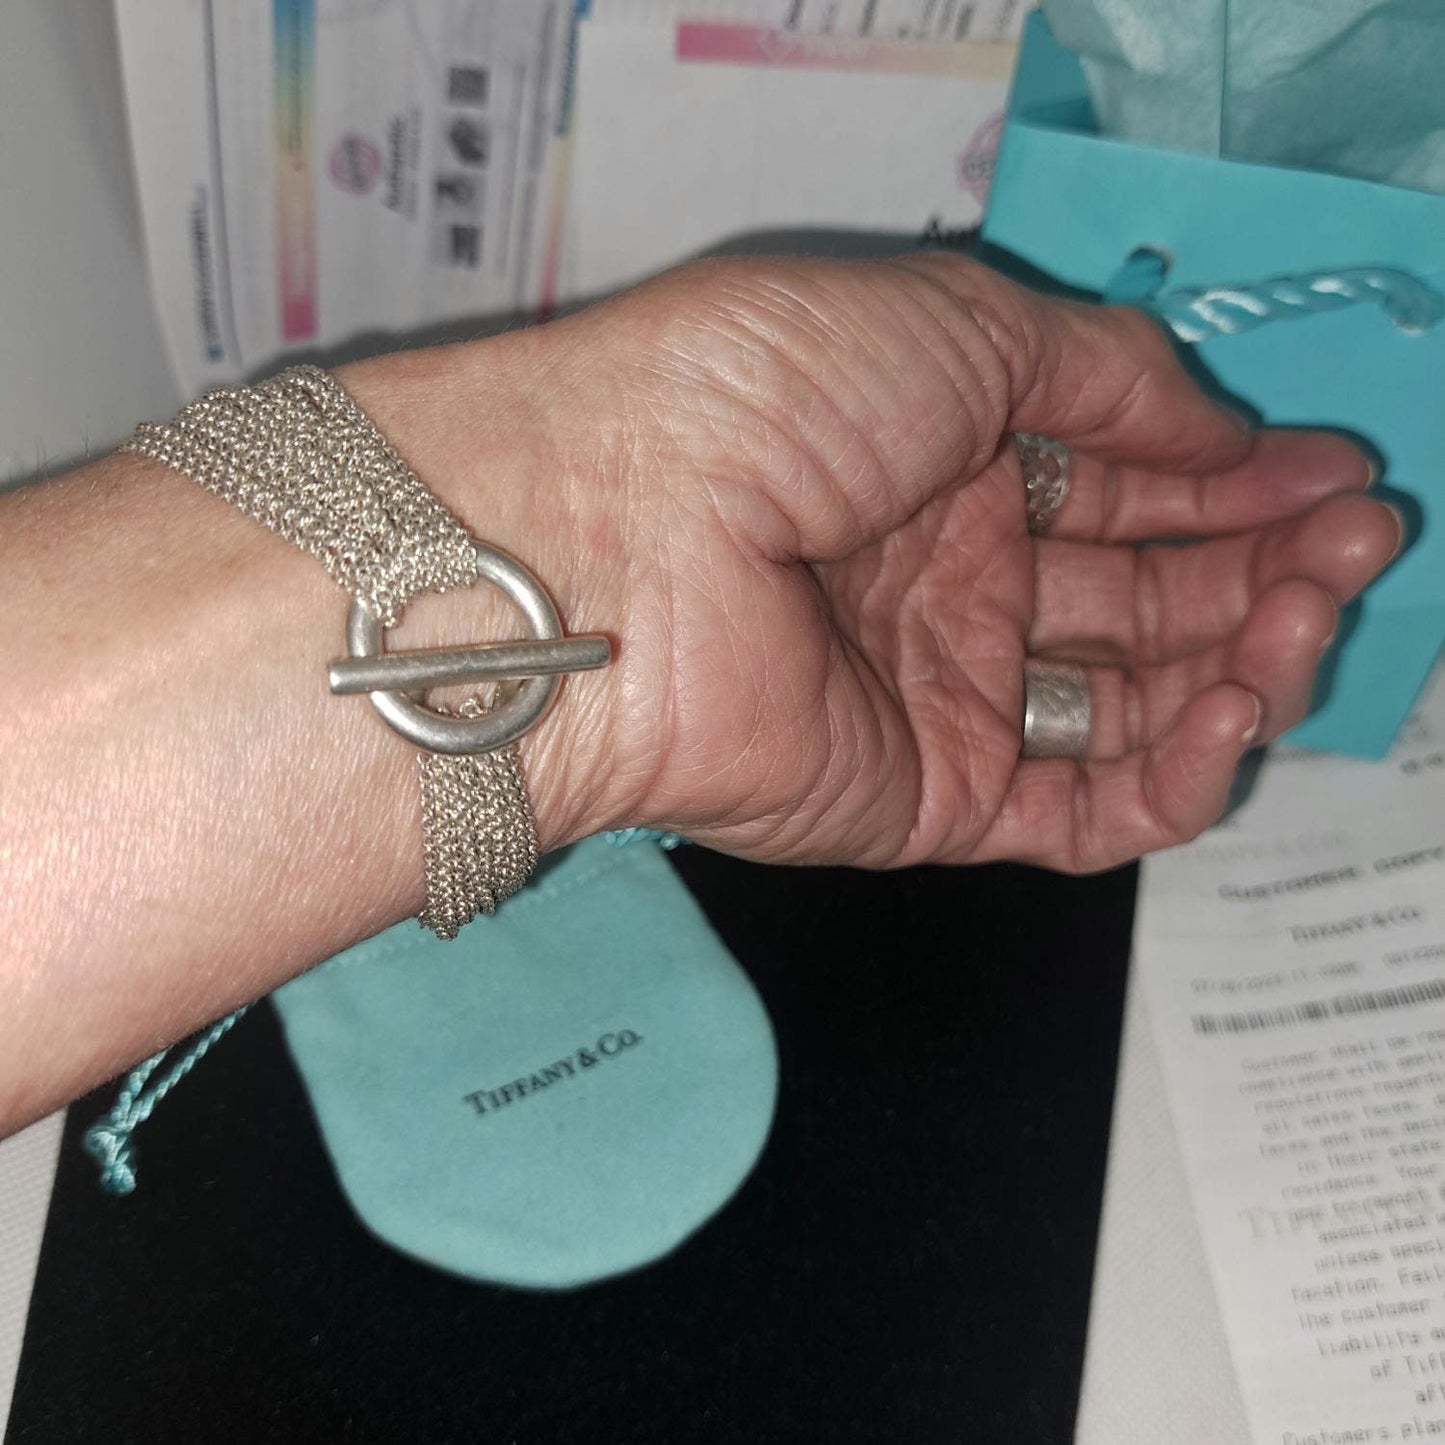 Your Valentine will LOVE this Authentic Mesh Heart Tiffany & Co Bracelet with gift bag